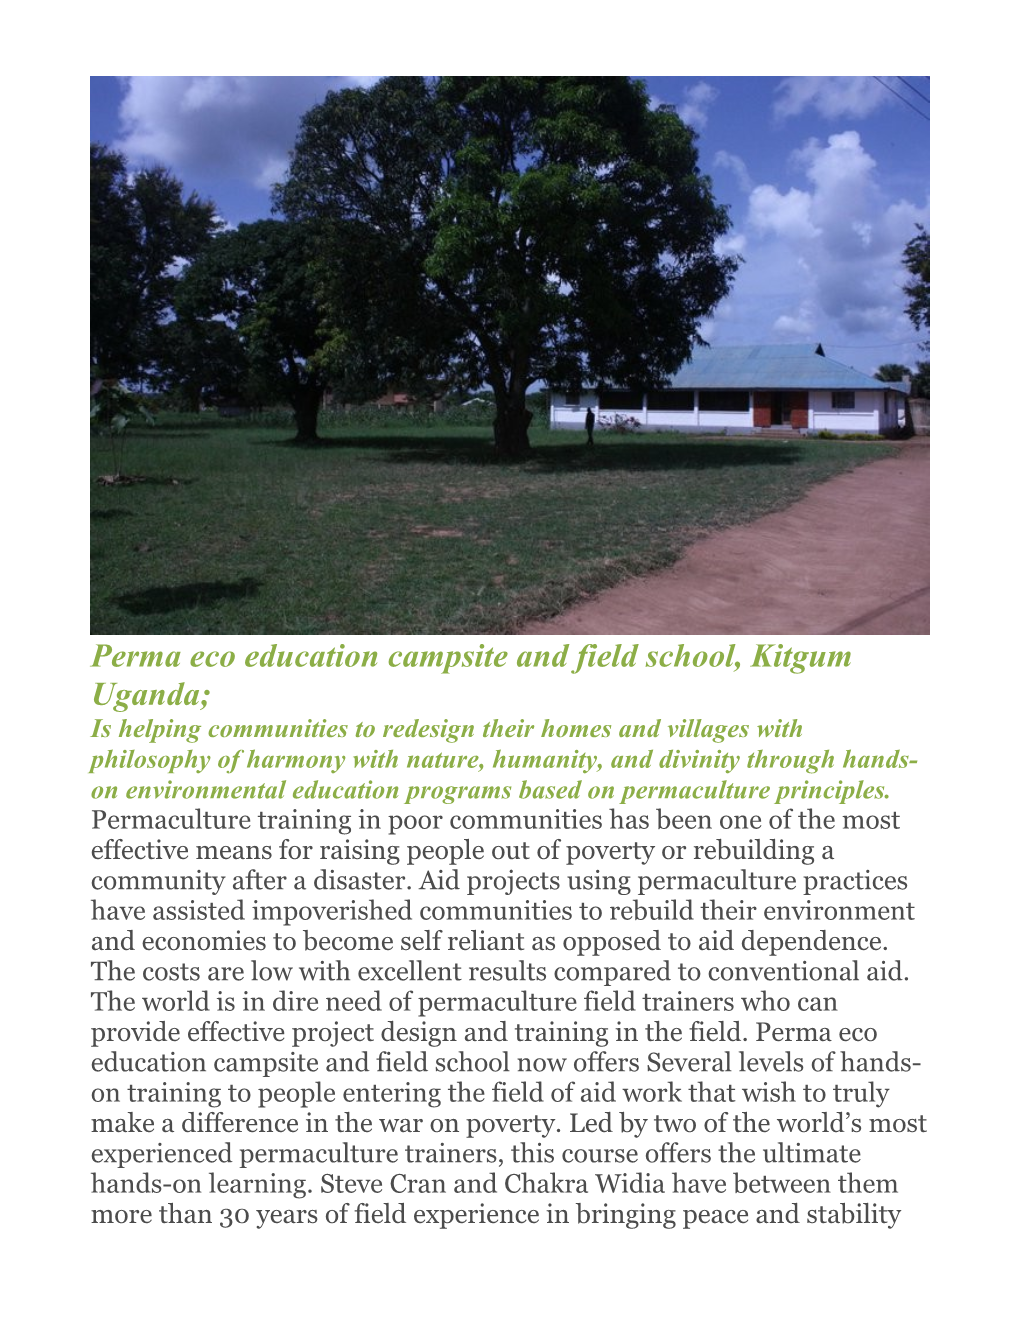 Field Academy for Sustainable Agriculture-Kitgum (FASA-K)